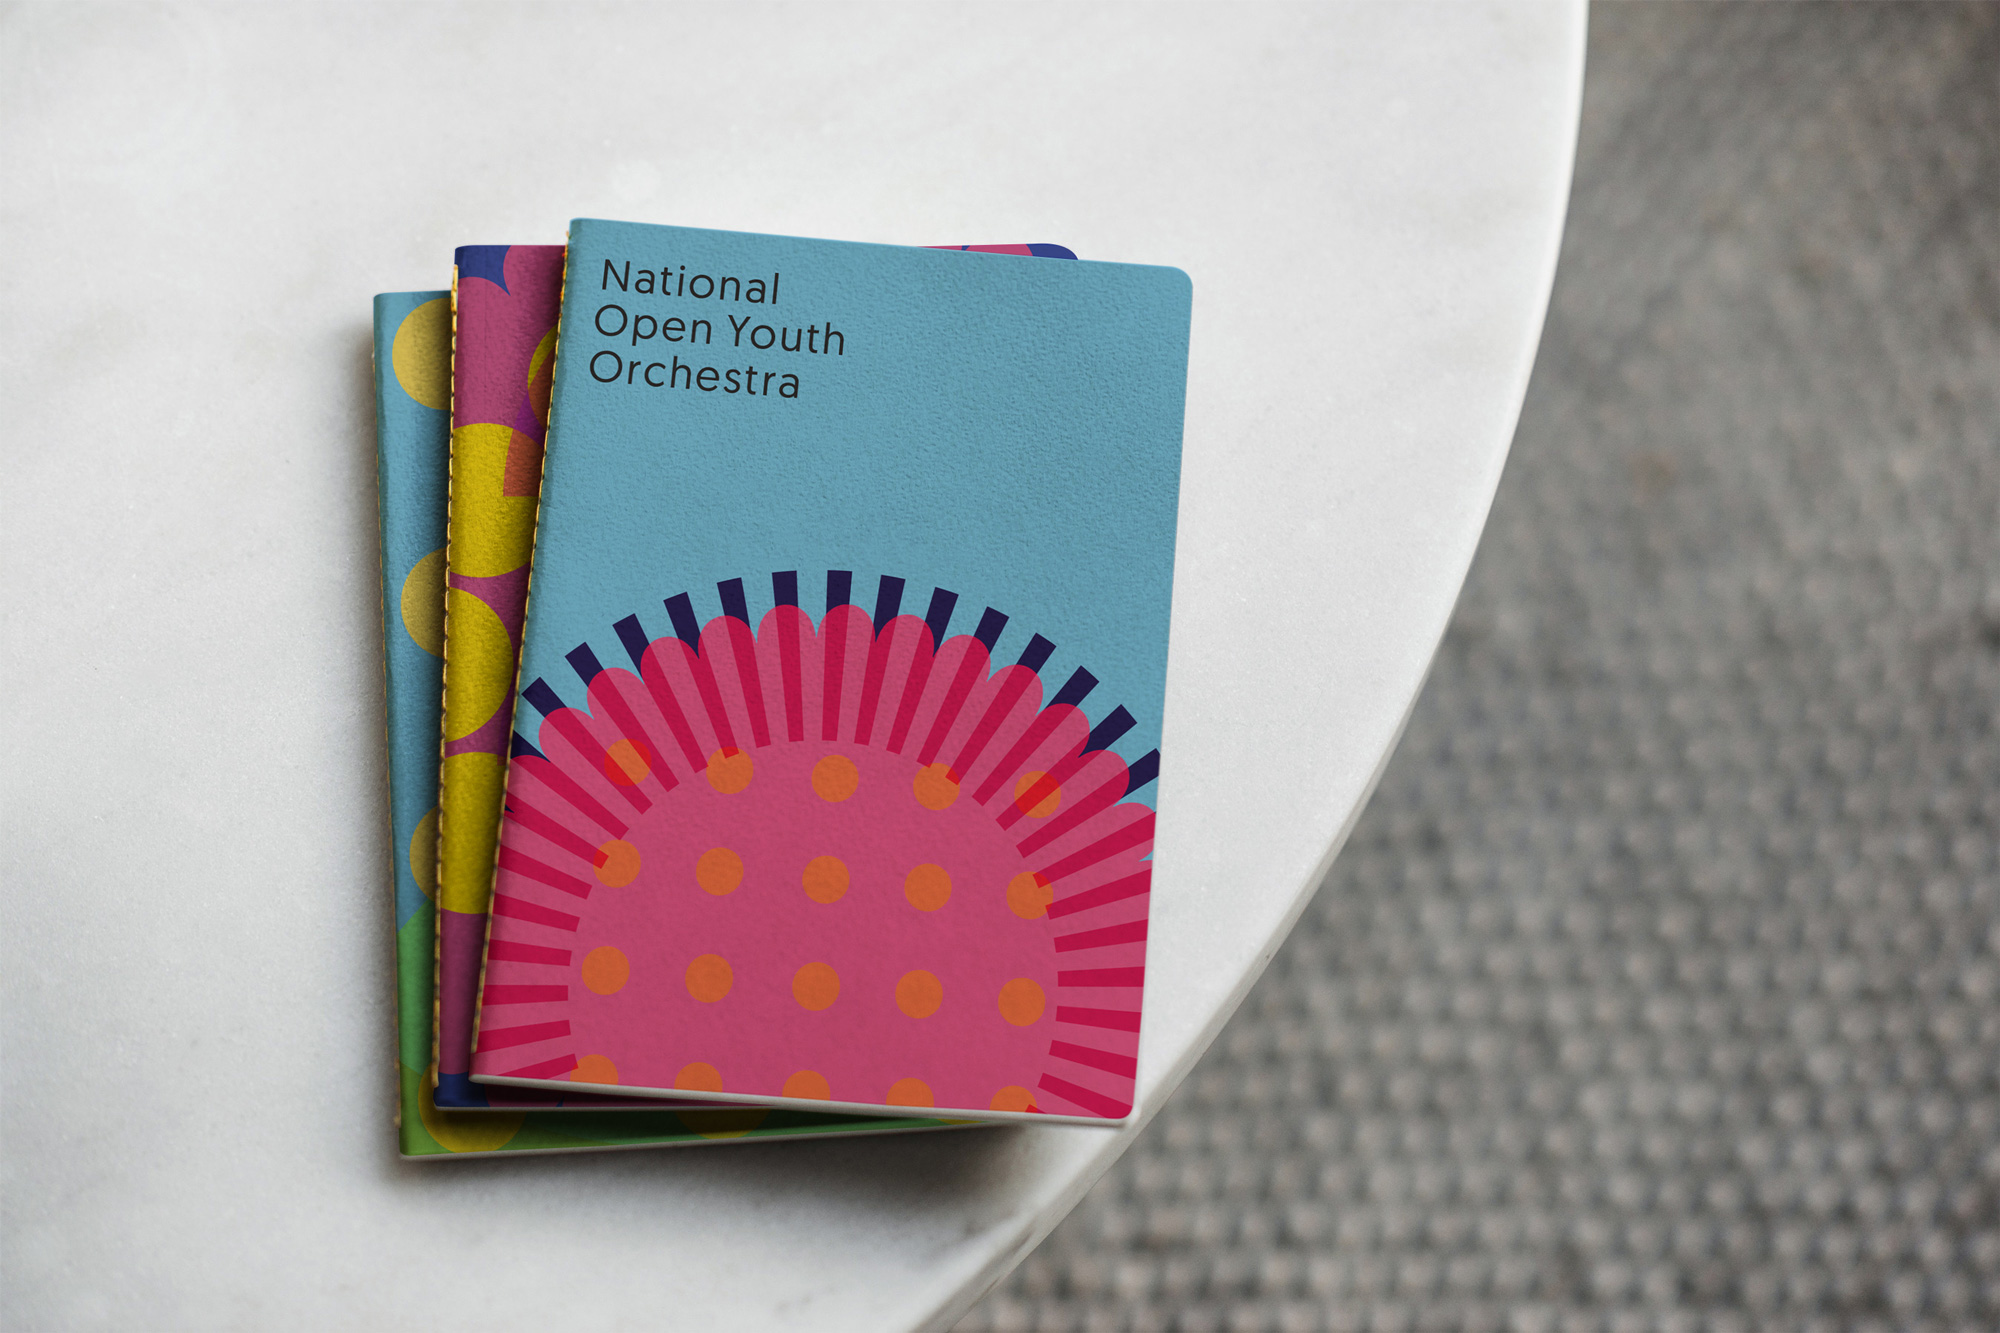 New Logo and Identity for National Open Youth Orchestra by Fiasco Design